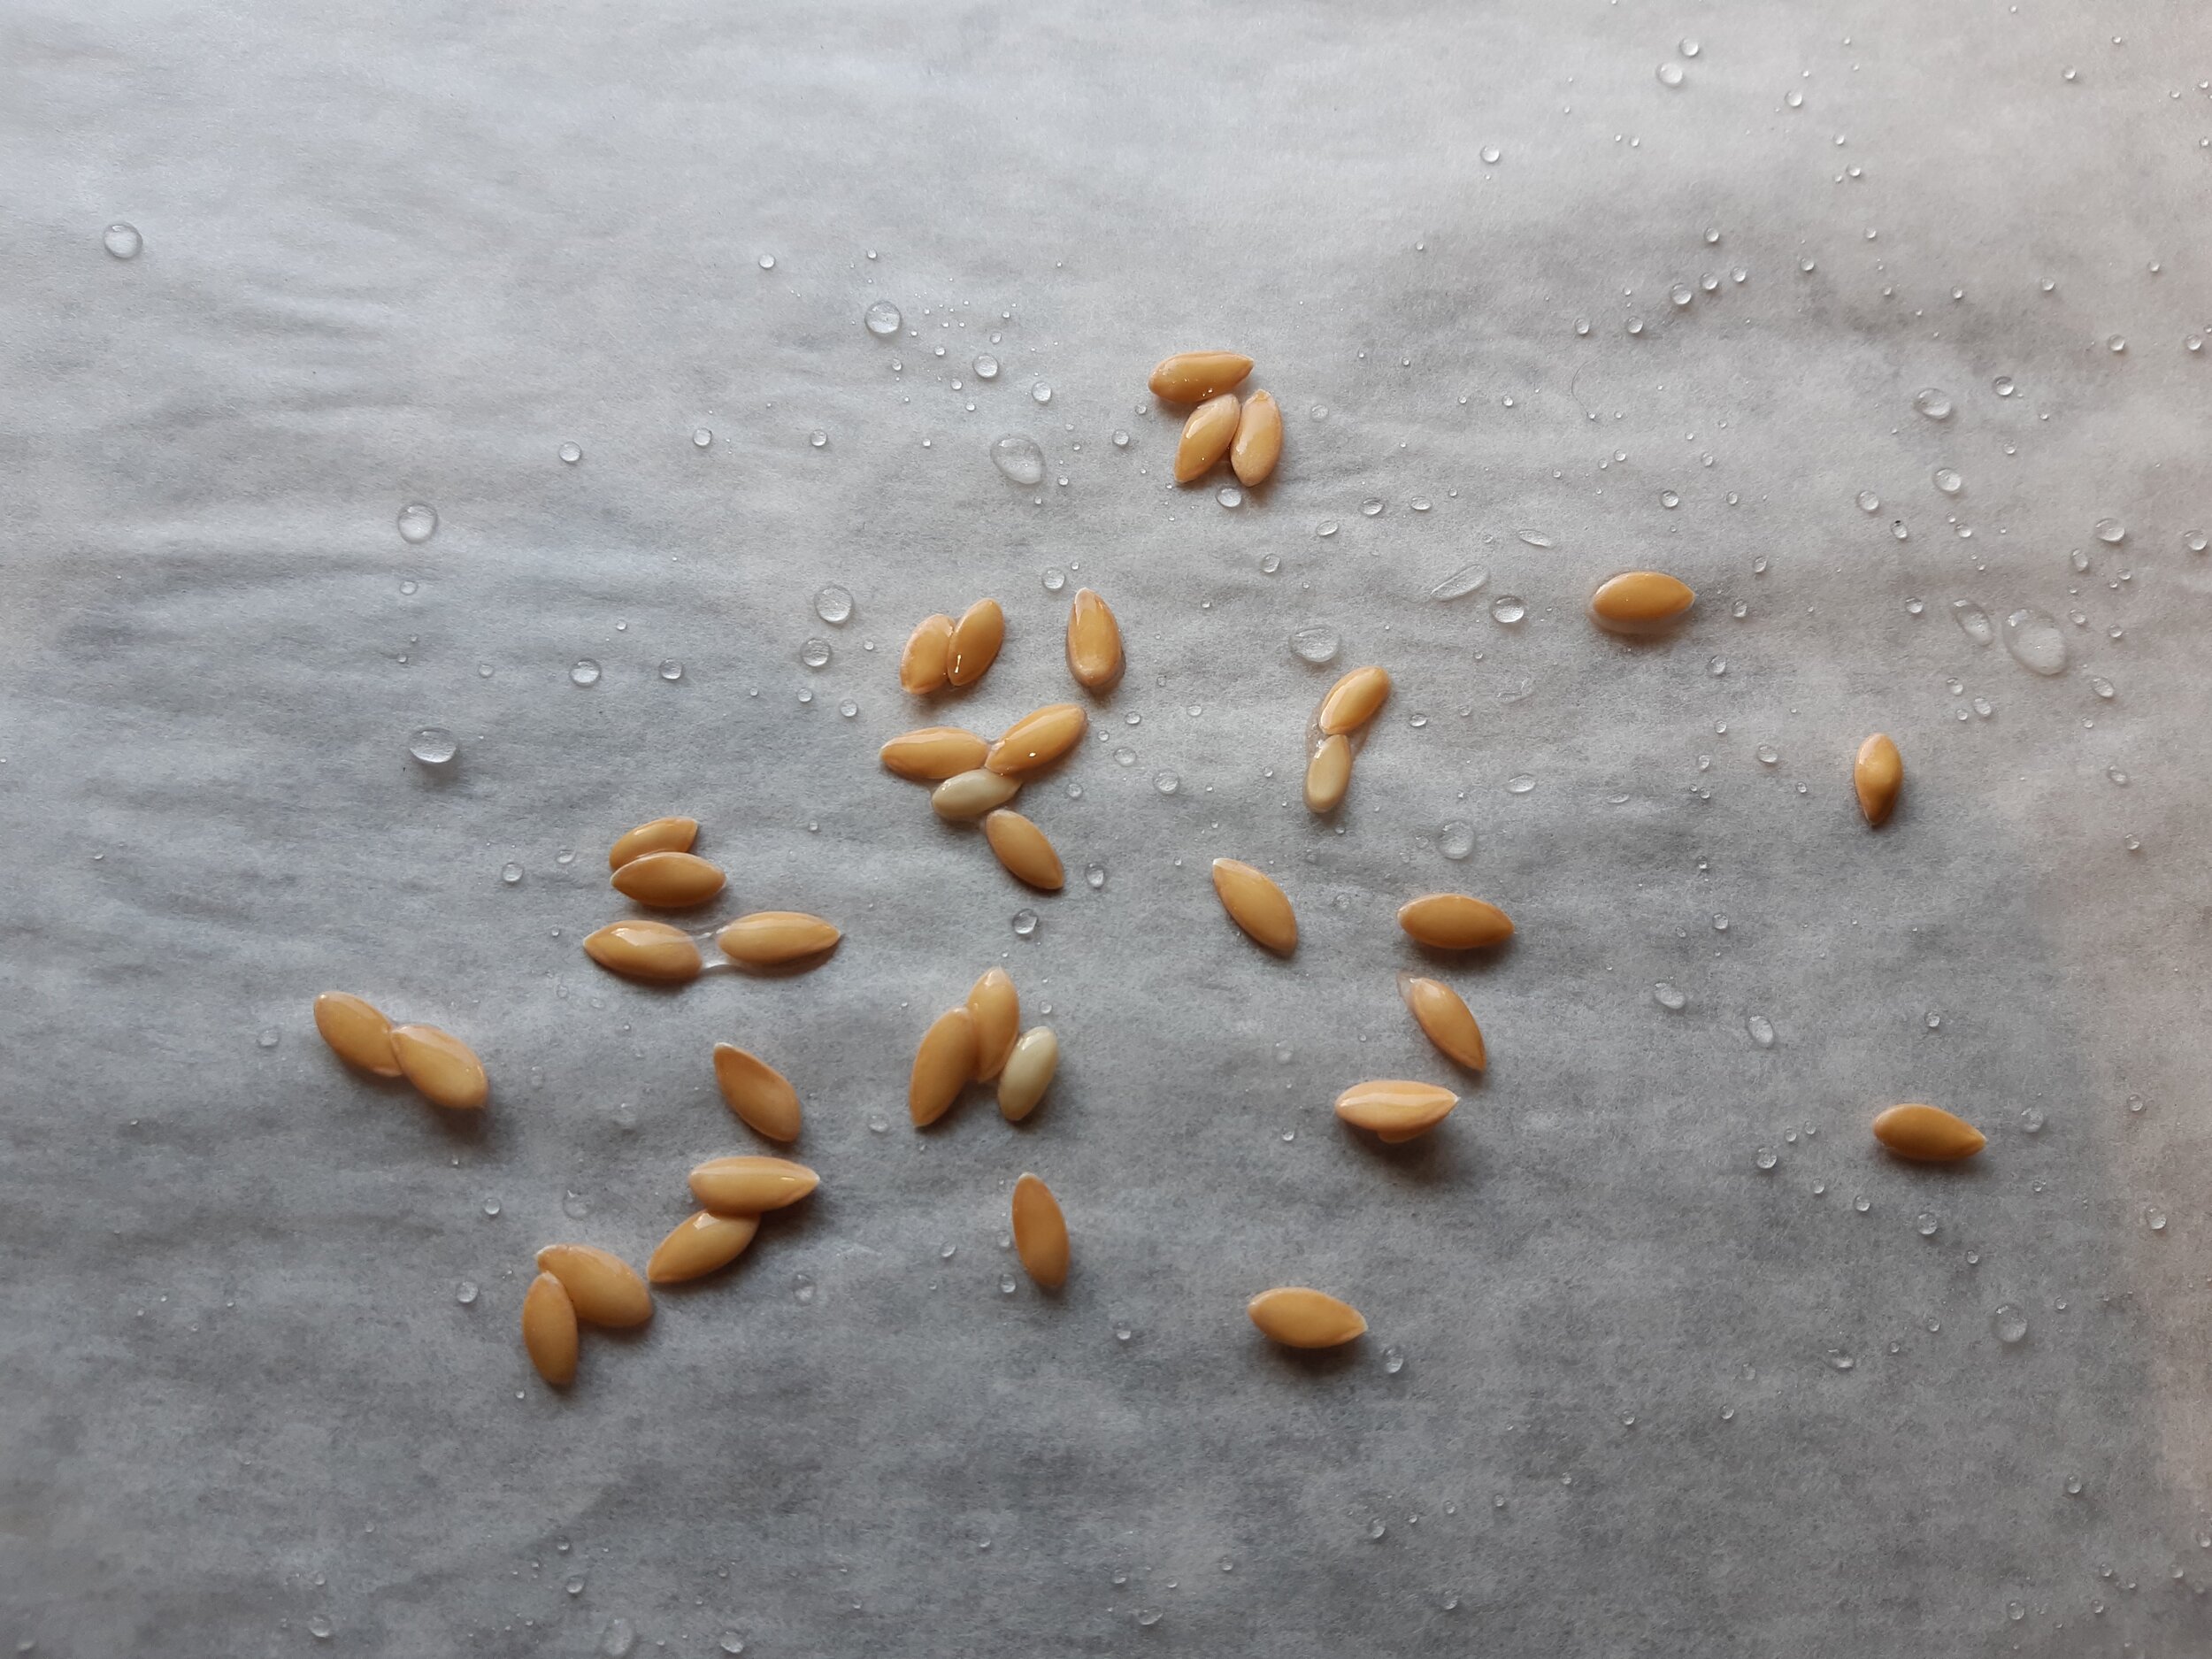  Melon seeds drying on silicon paper. 